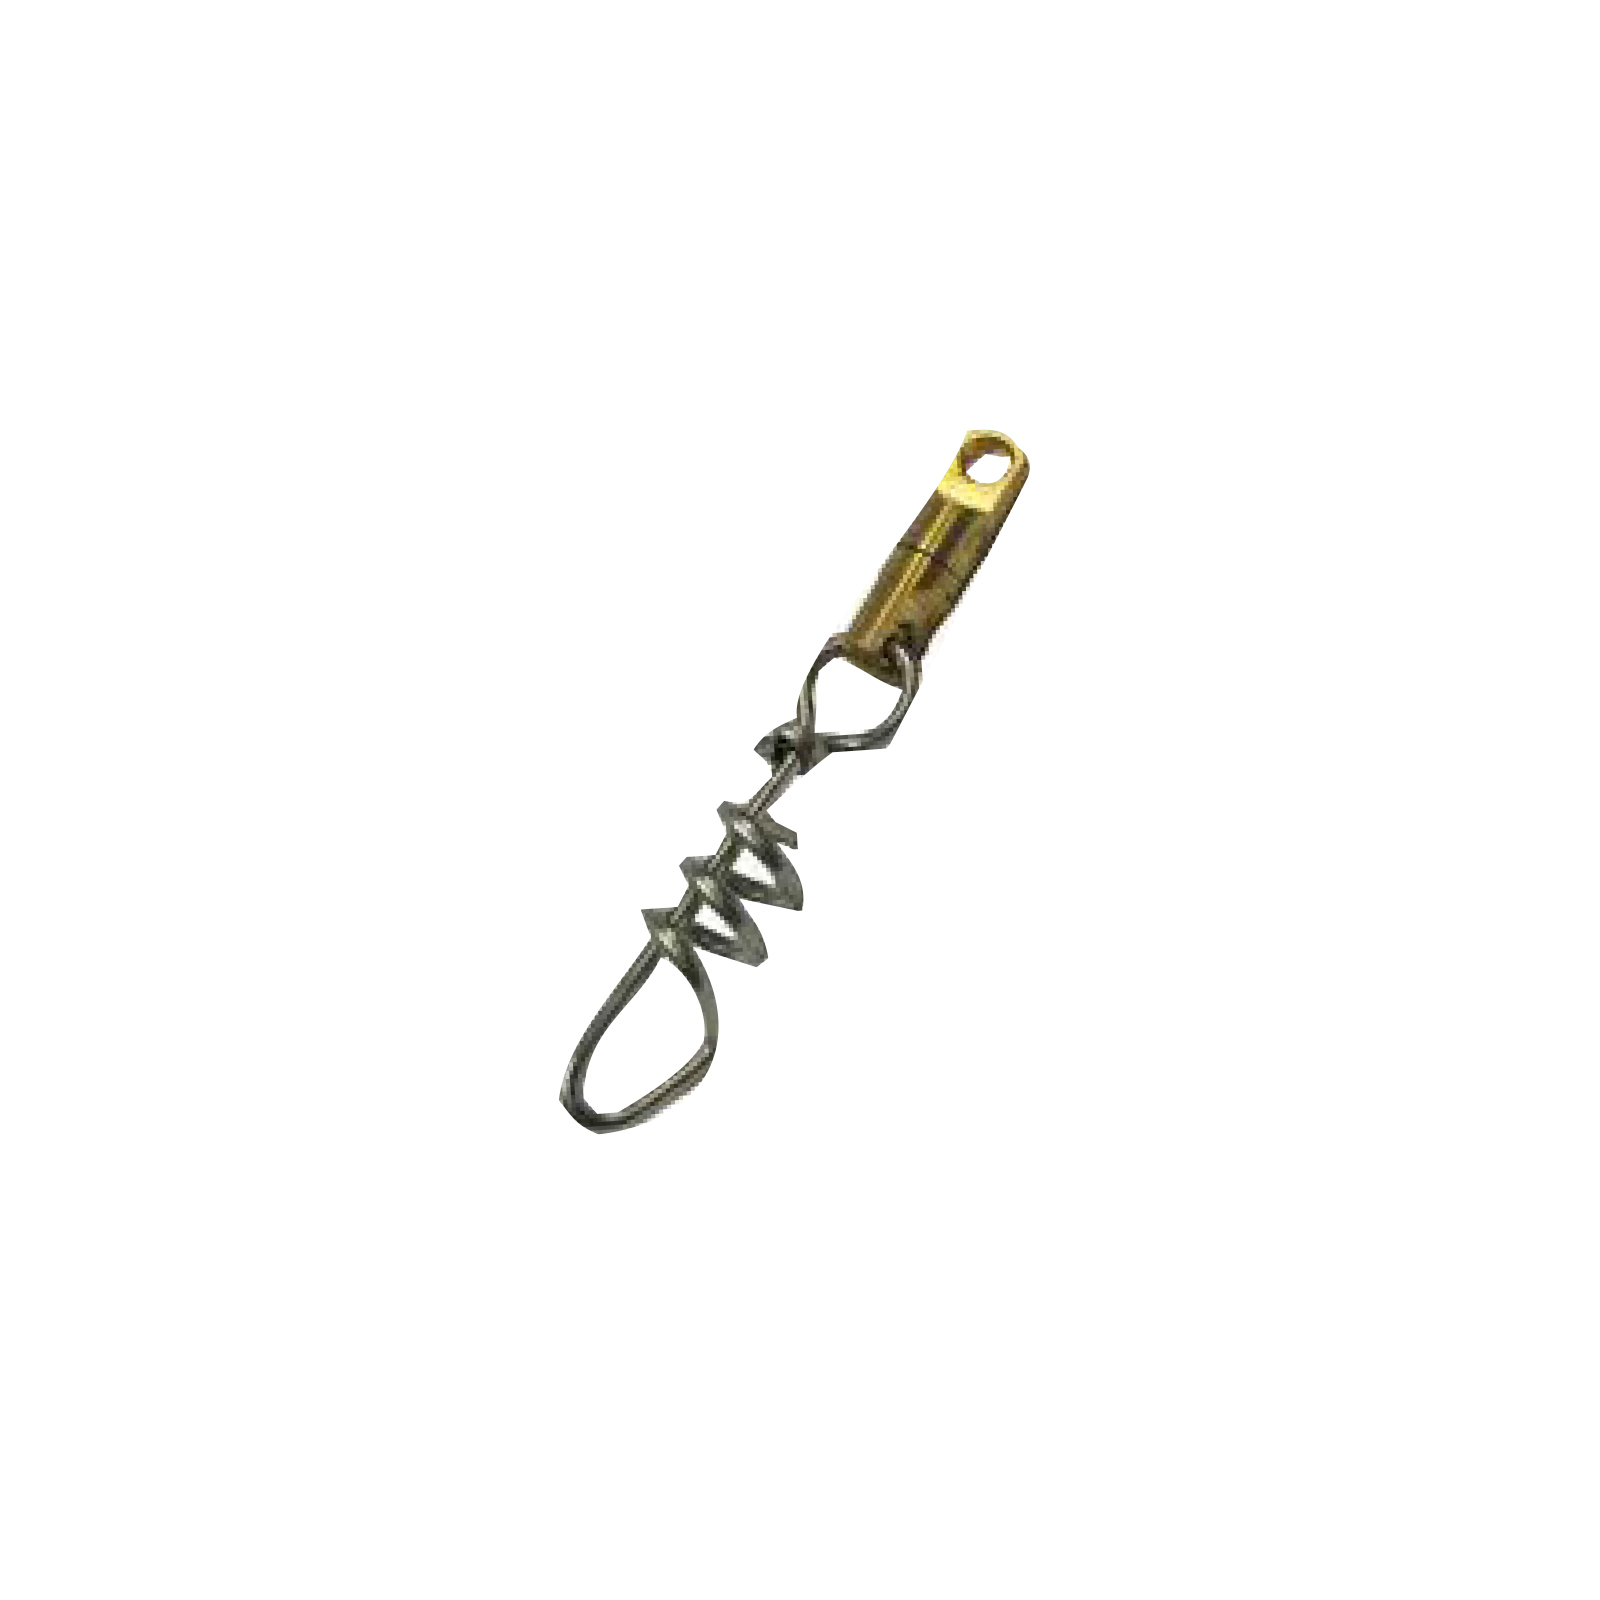 Mares Swivel W/ Pigtail clip